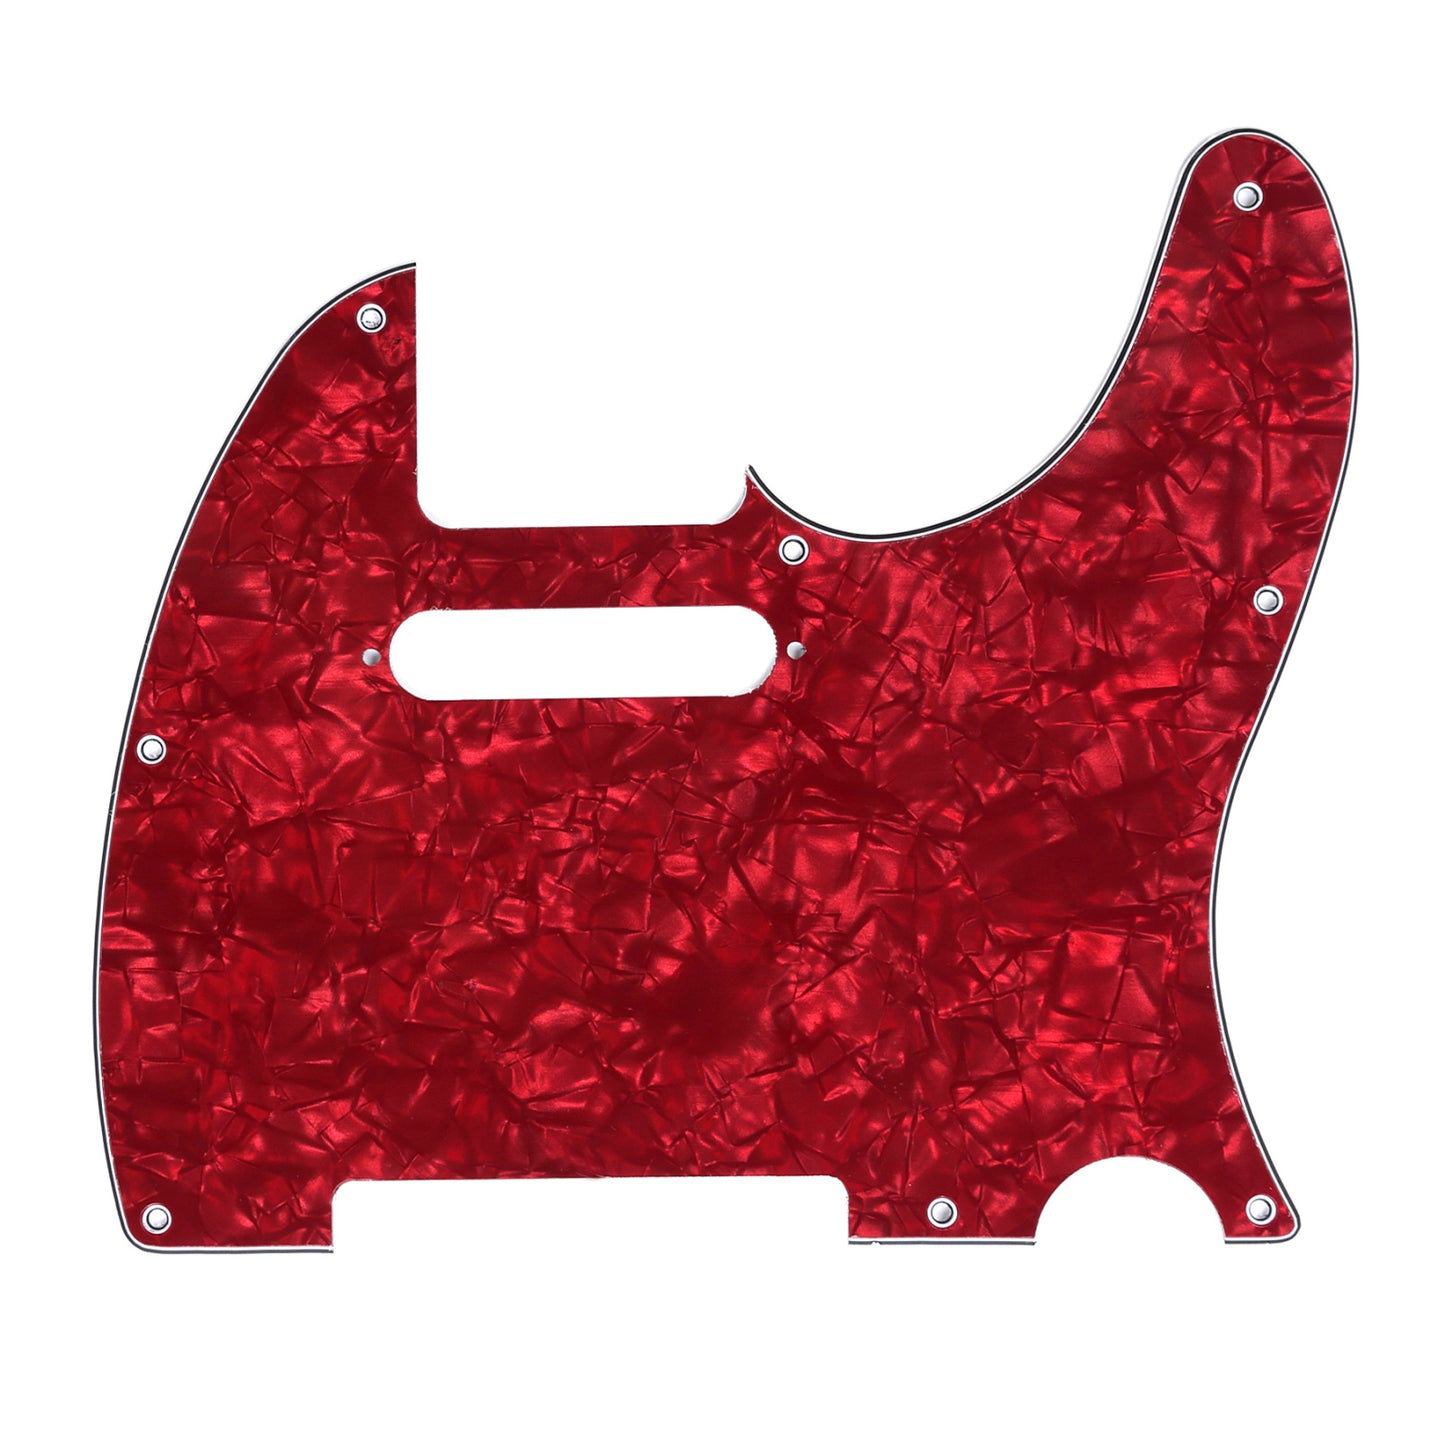 Musiclily 8 Hole Tele Guitar Pickguard for USA/Mexican Made Fender Standard Telecaster Modern Style , 4Ply Red Pearl